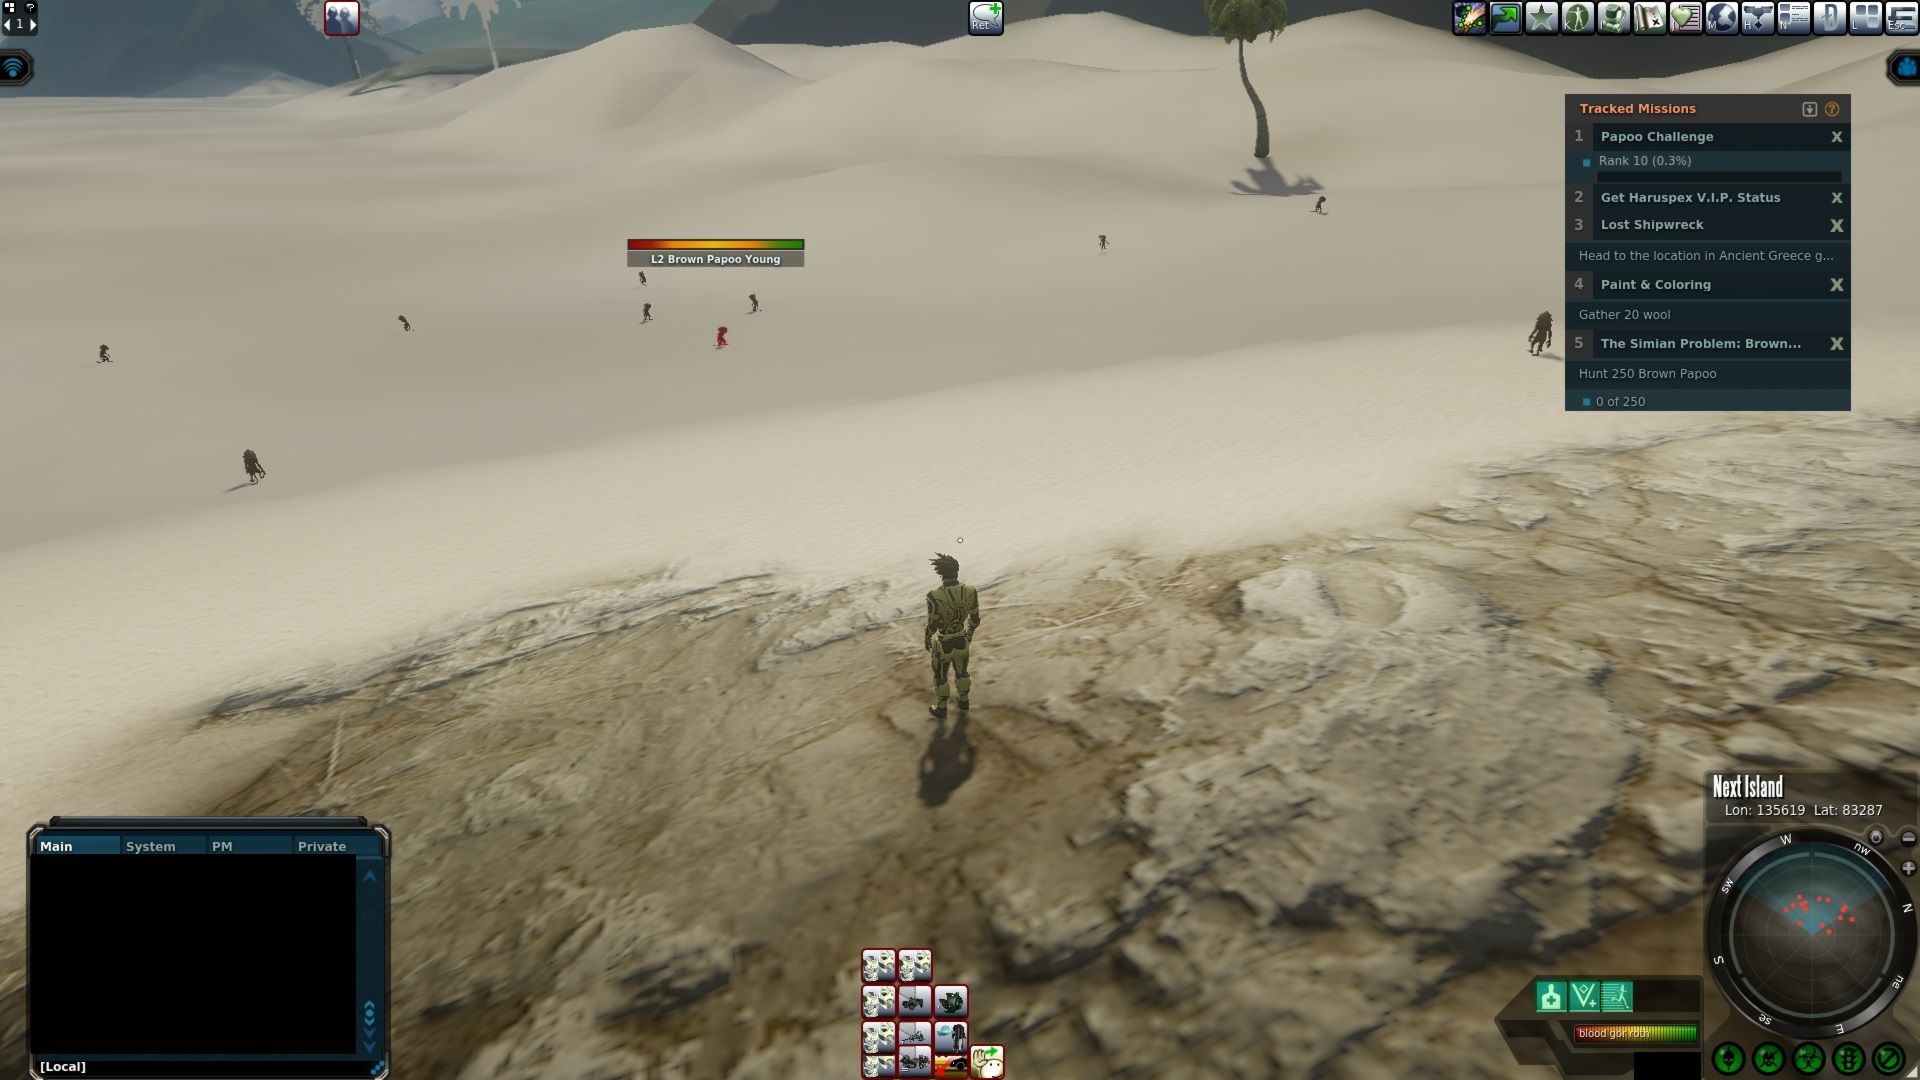 Brown papoo location Next Island Entropia Universe The Simion Problem.jpg